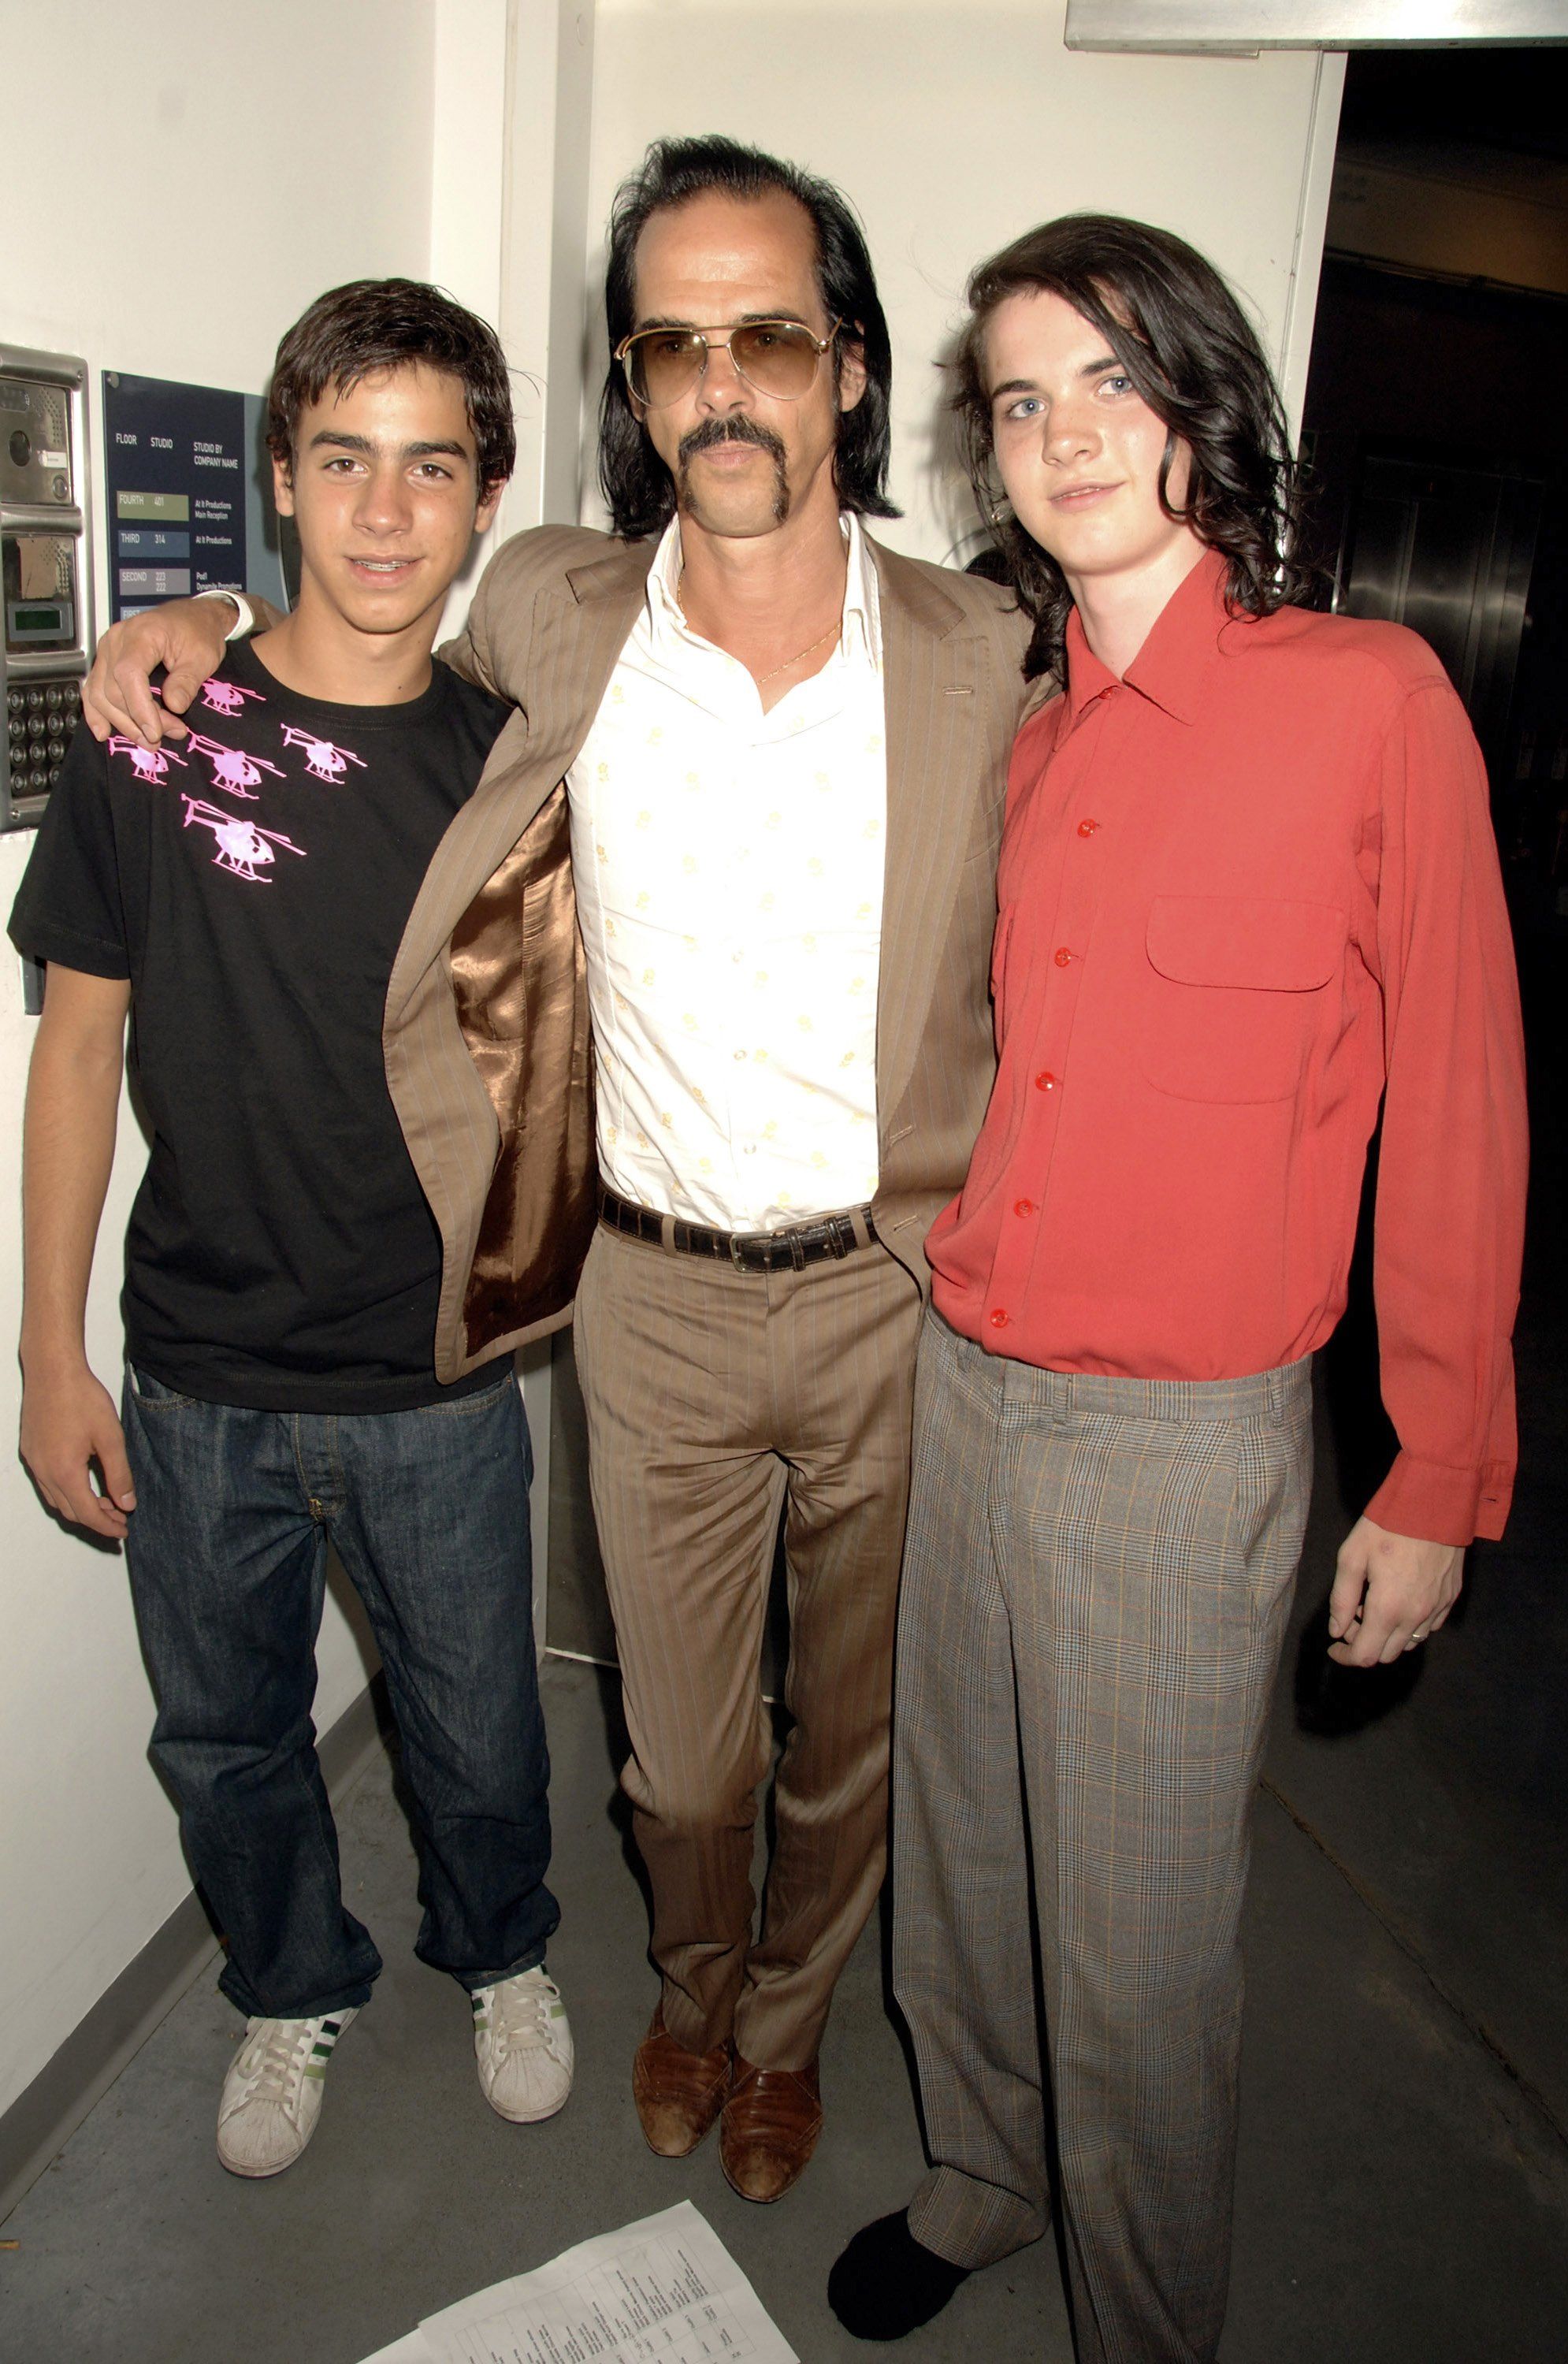 Nick Cave, Luke Cave, and Jethro Cave during the fashion show at Portobello Film Festival curated by Bella Freud with clothes from Portobello Market, at Westbourne Studios on August 3, 2006 in London, England. | Source: Getty Images